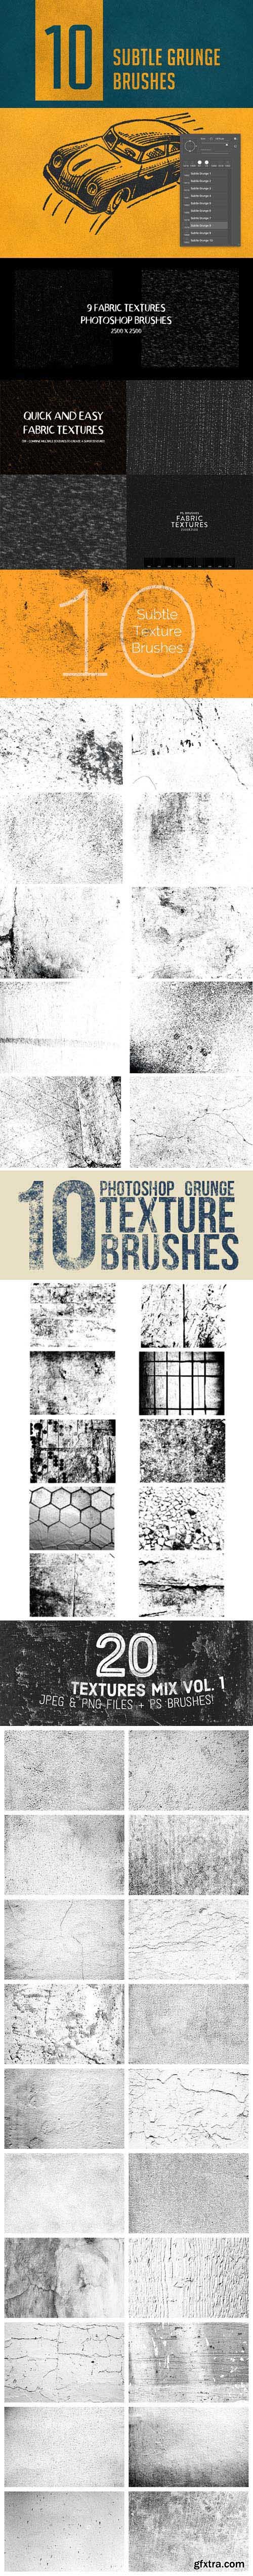 50+ Grunge & Fabric Textures Brushes for Photoshop